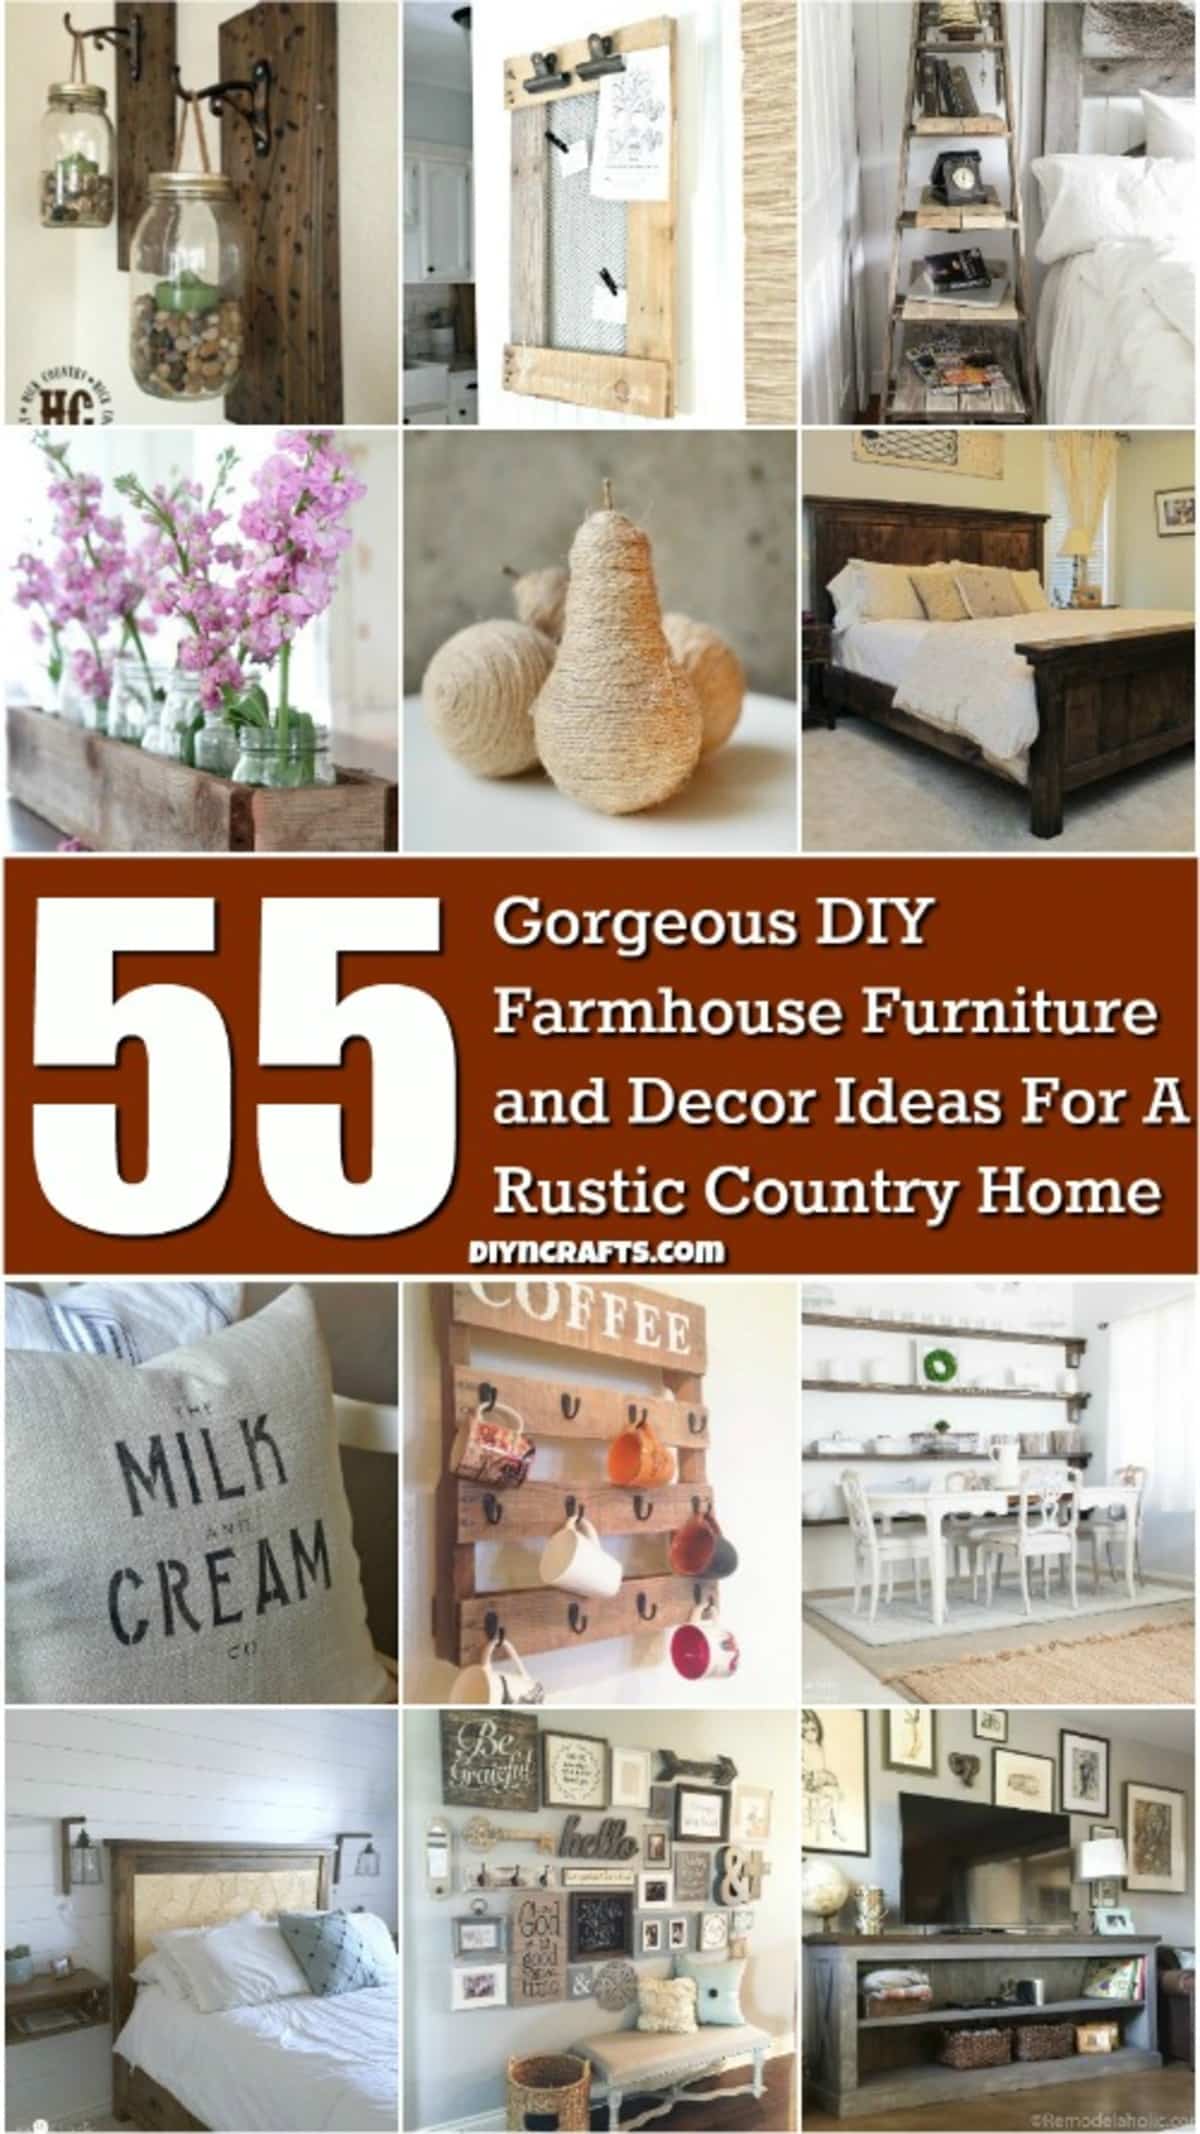 55 Gorgeous DIY Farmhouse Furniture and Decor Ideas For A Rustic Country Home collage.